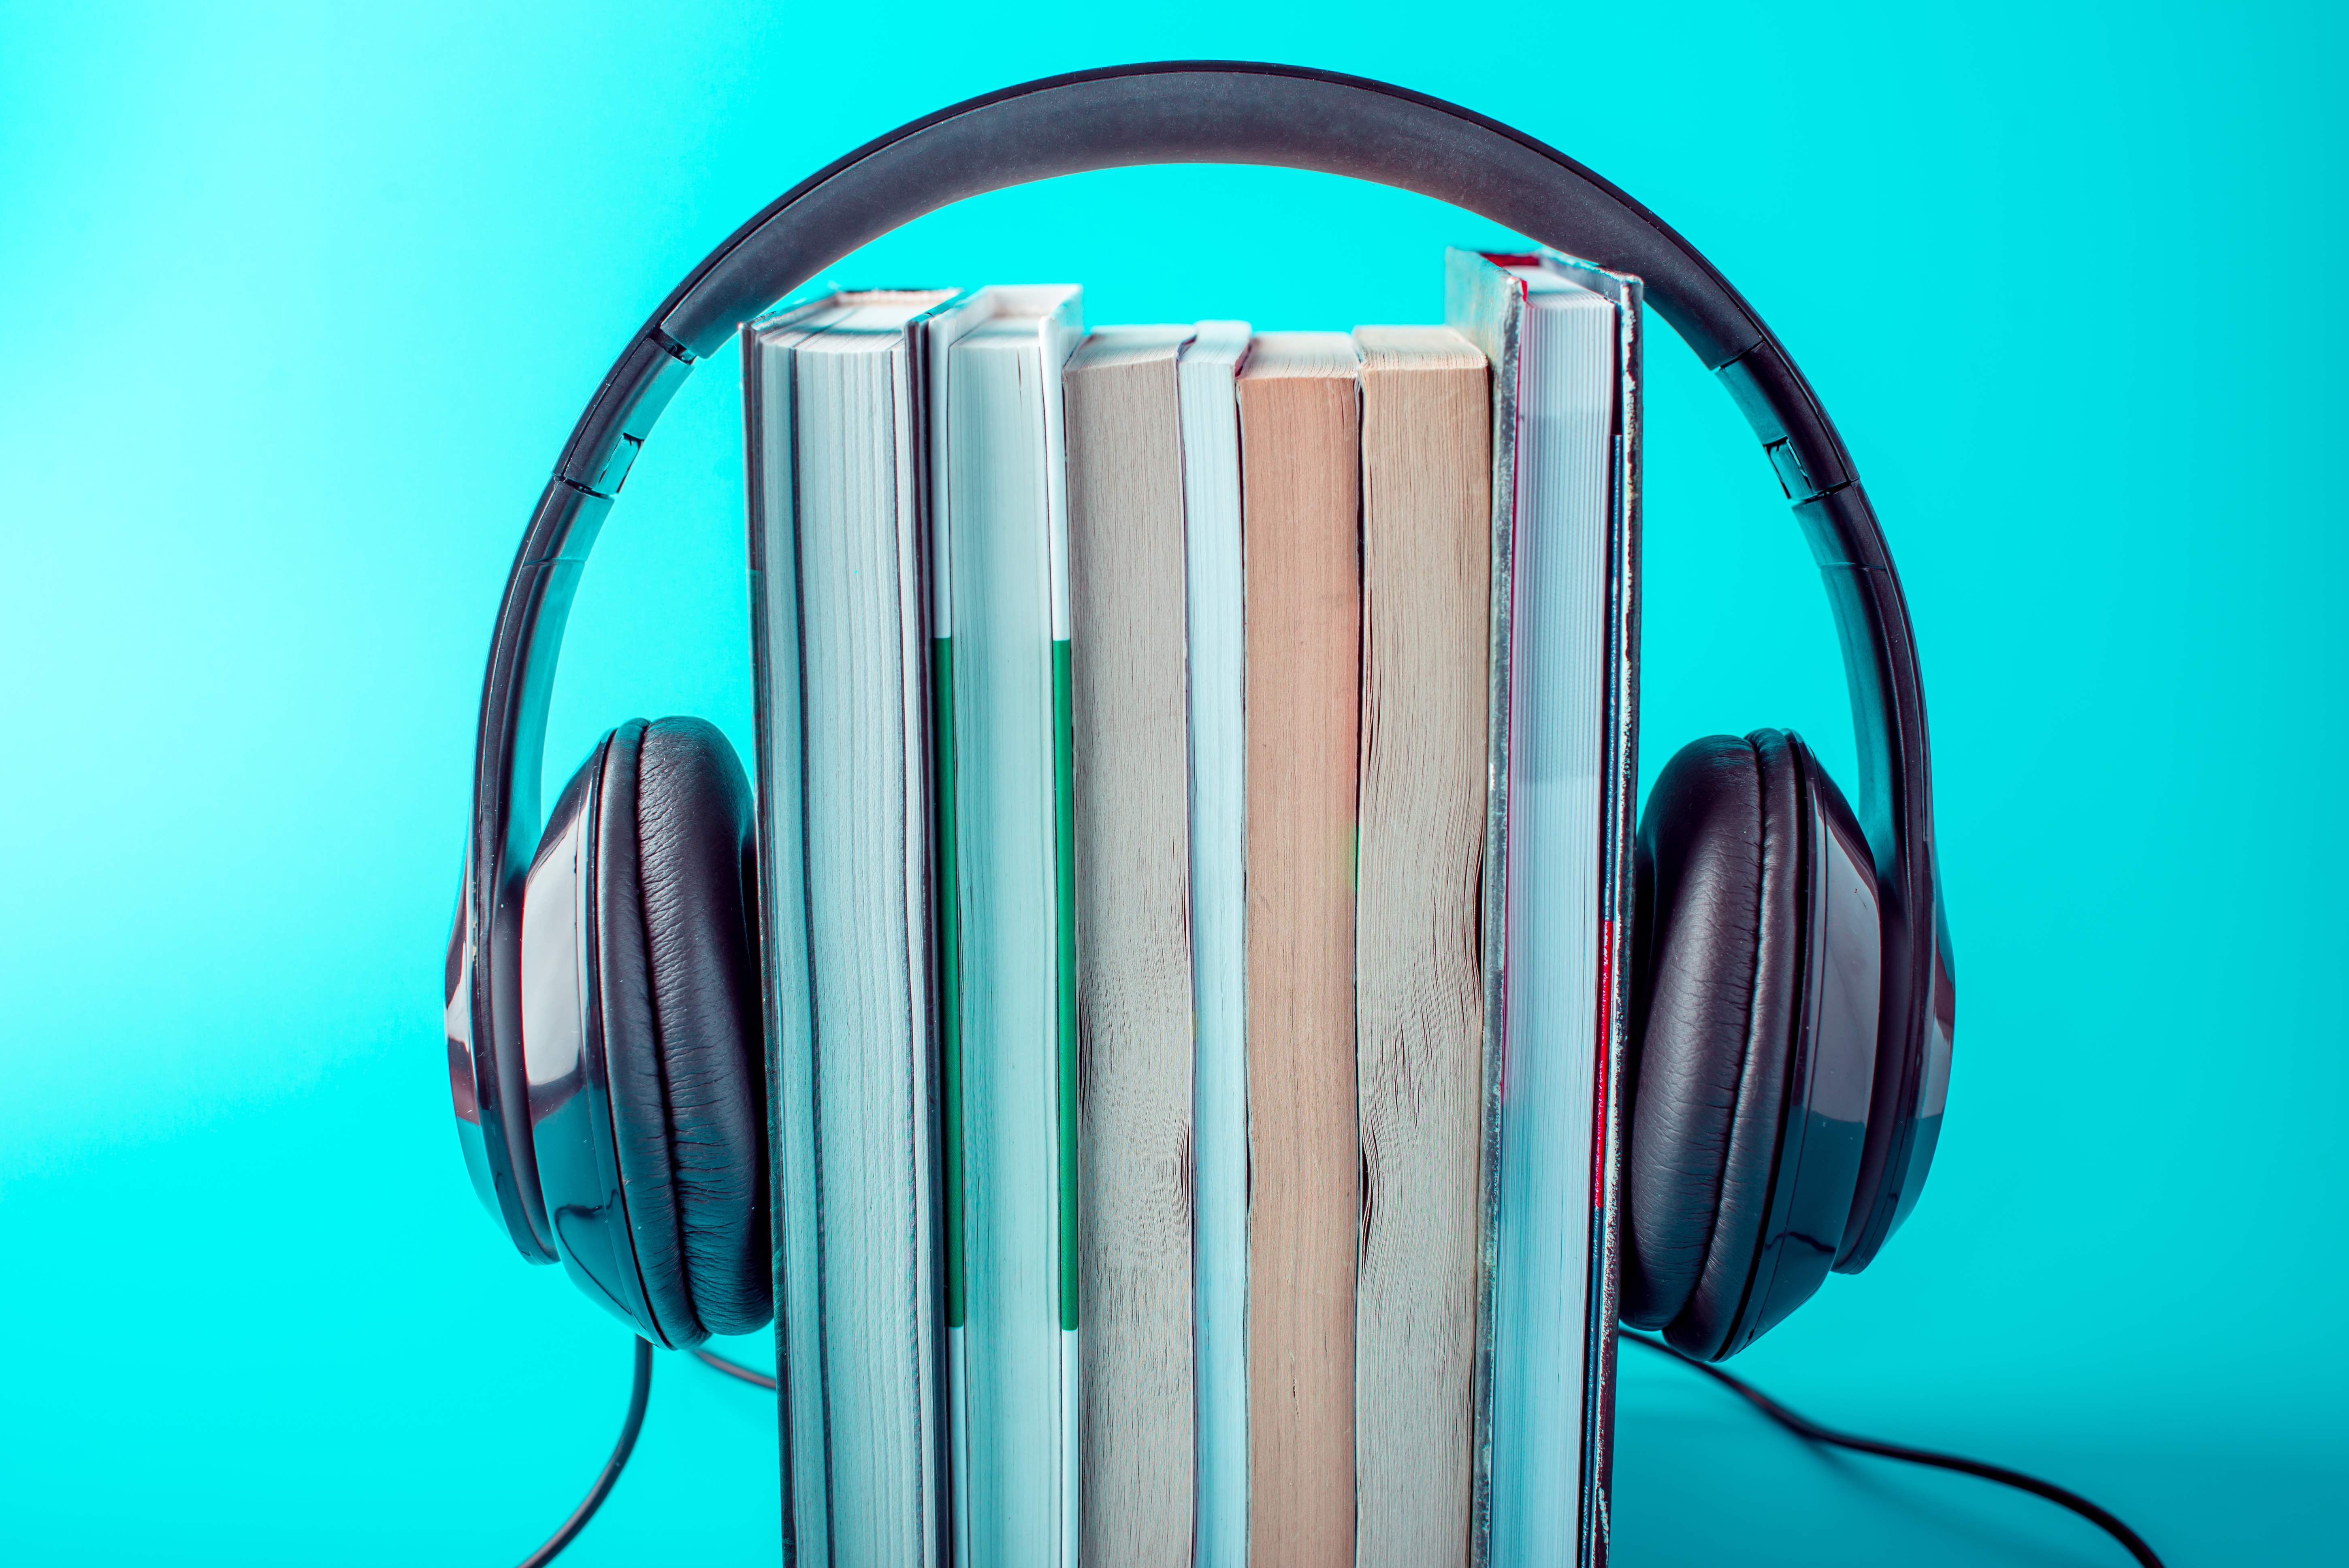 Do audiobooks count as reading?